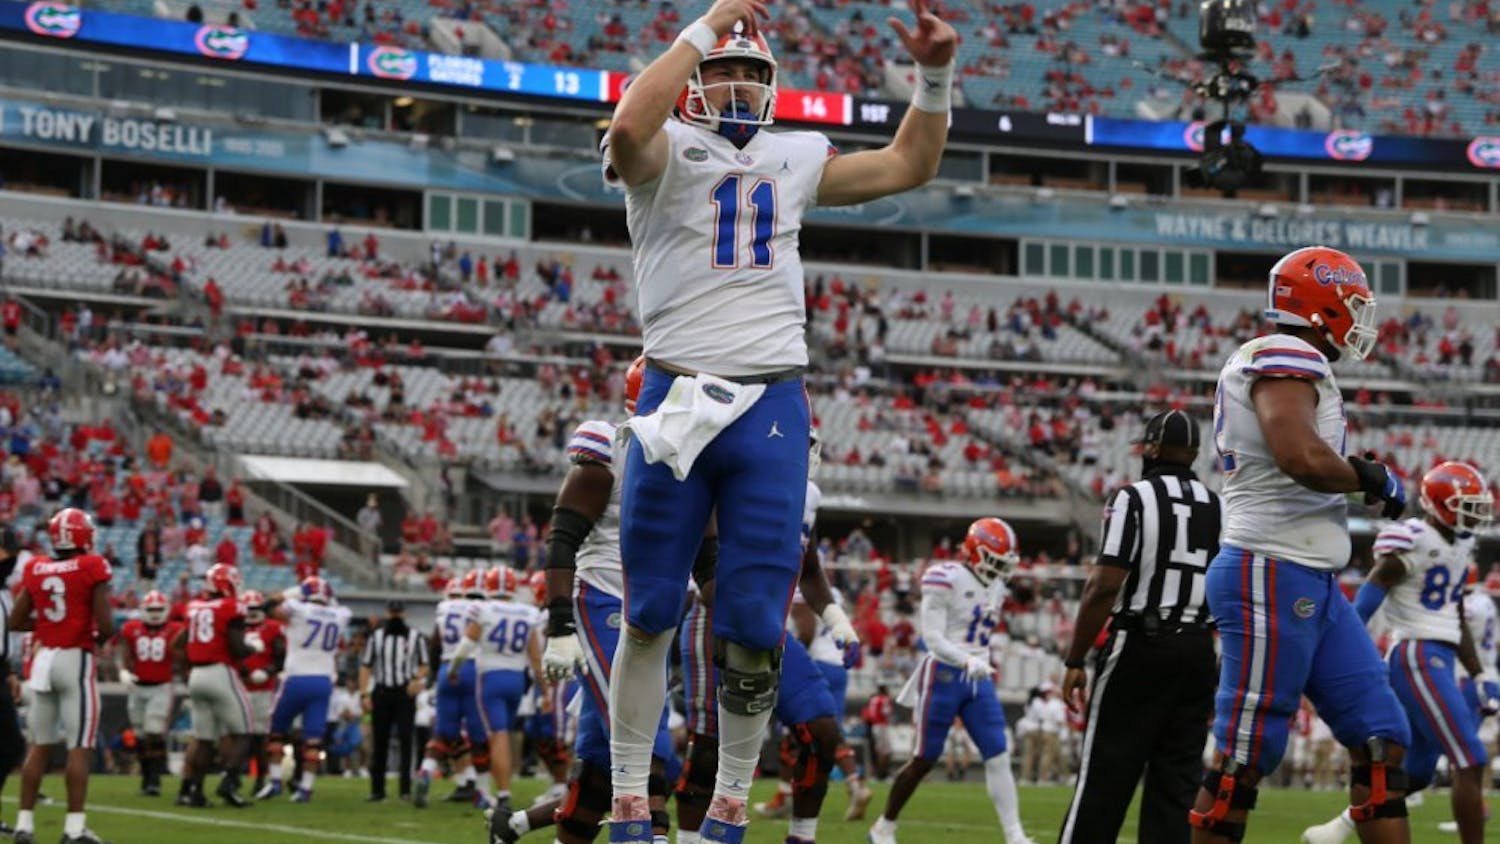 Florida quarterback Kyle Trask hypes up the crowd at TIAA Bank Stadium in Jacksonville, Florida, Saturday. The Gators defeated the Bulldogs in the most recent rivalry game on Nov. 7.